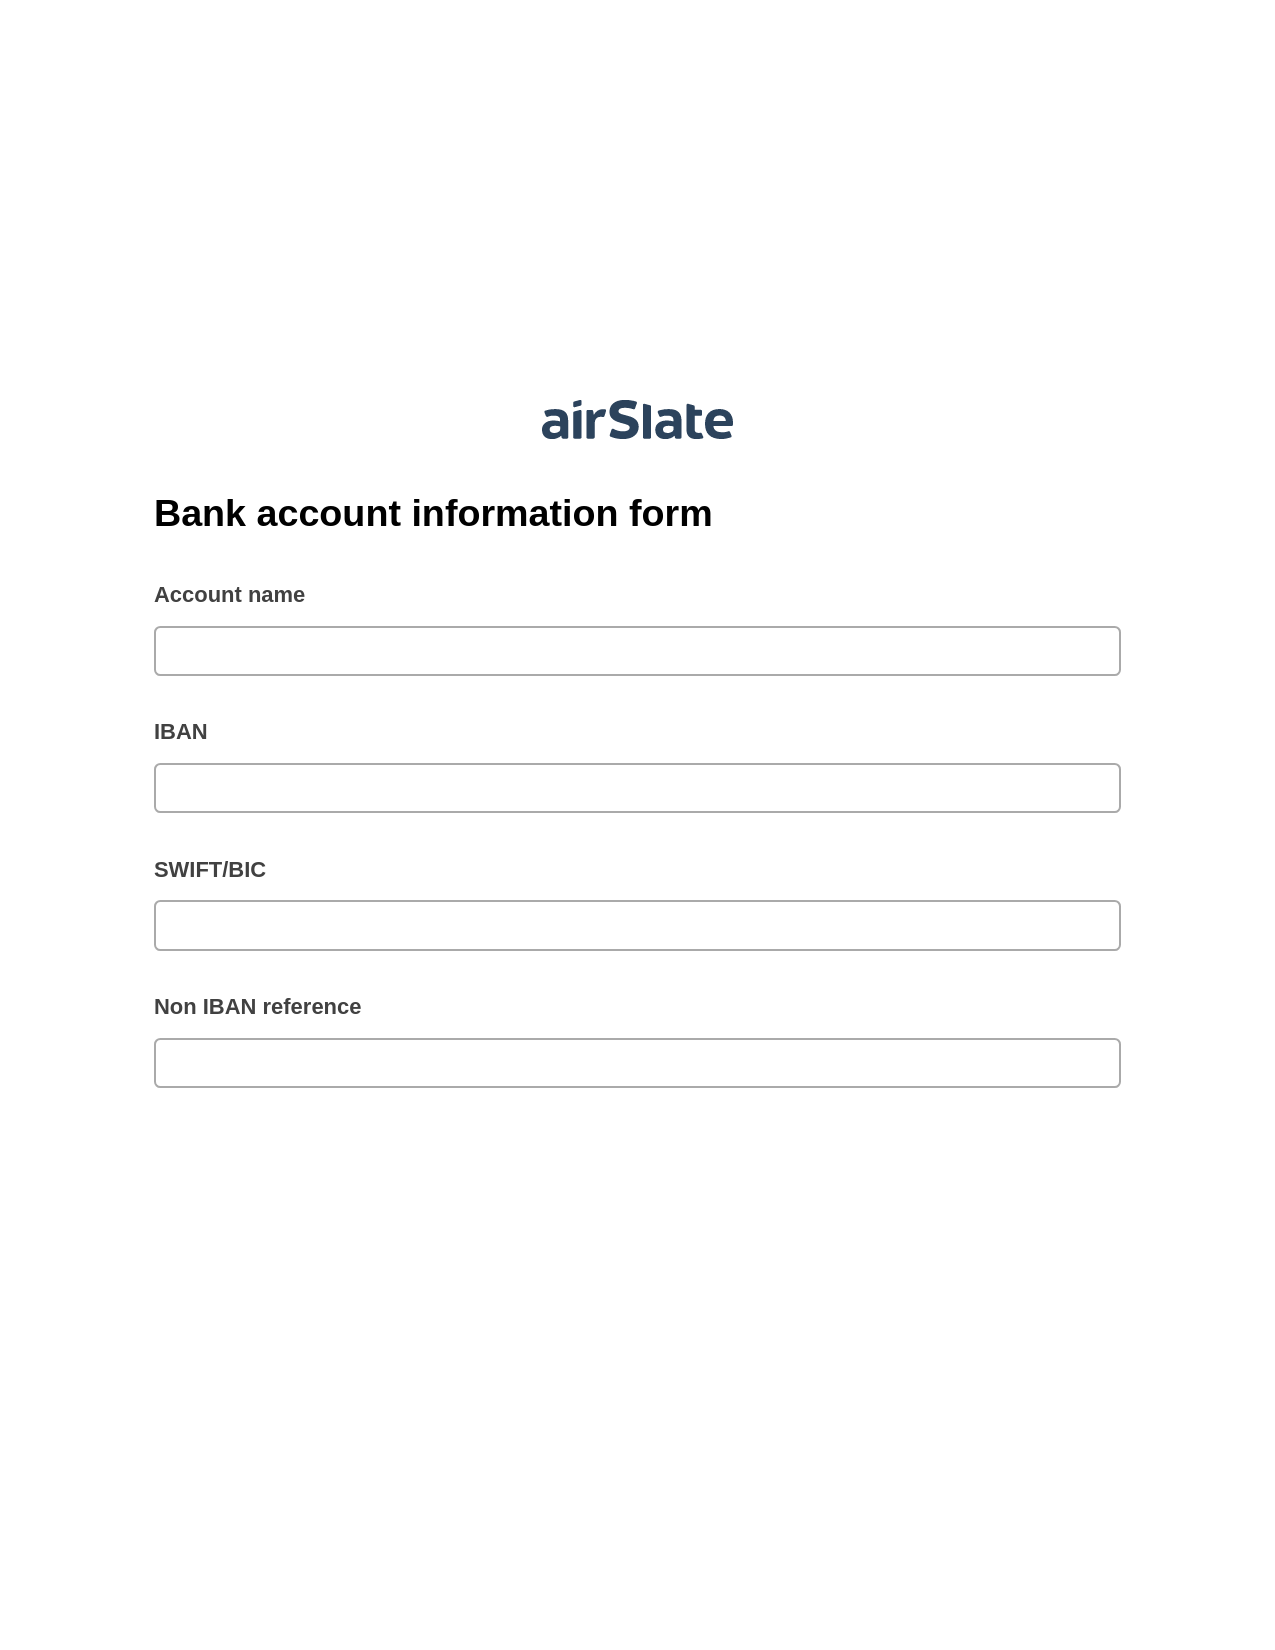 Multirole Bank account information form Pre-fill Dropdowns from Smartsheet Bot, Email Notification Bot, Export to Smartsheet